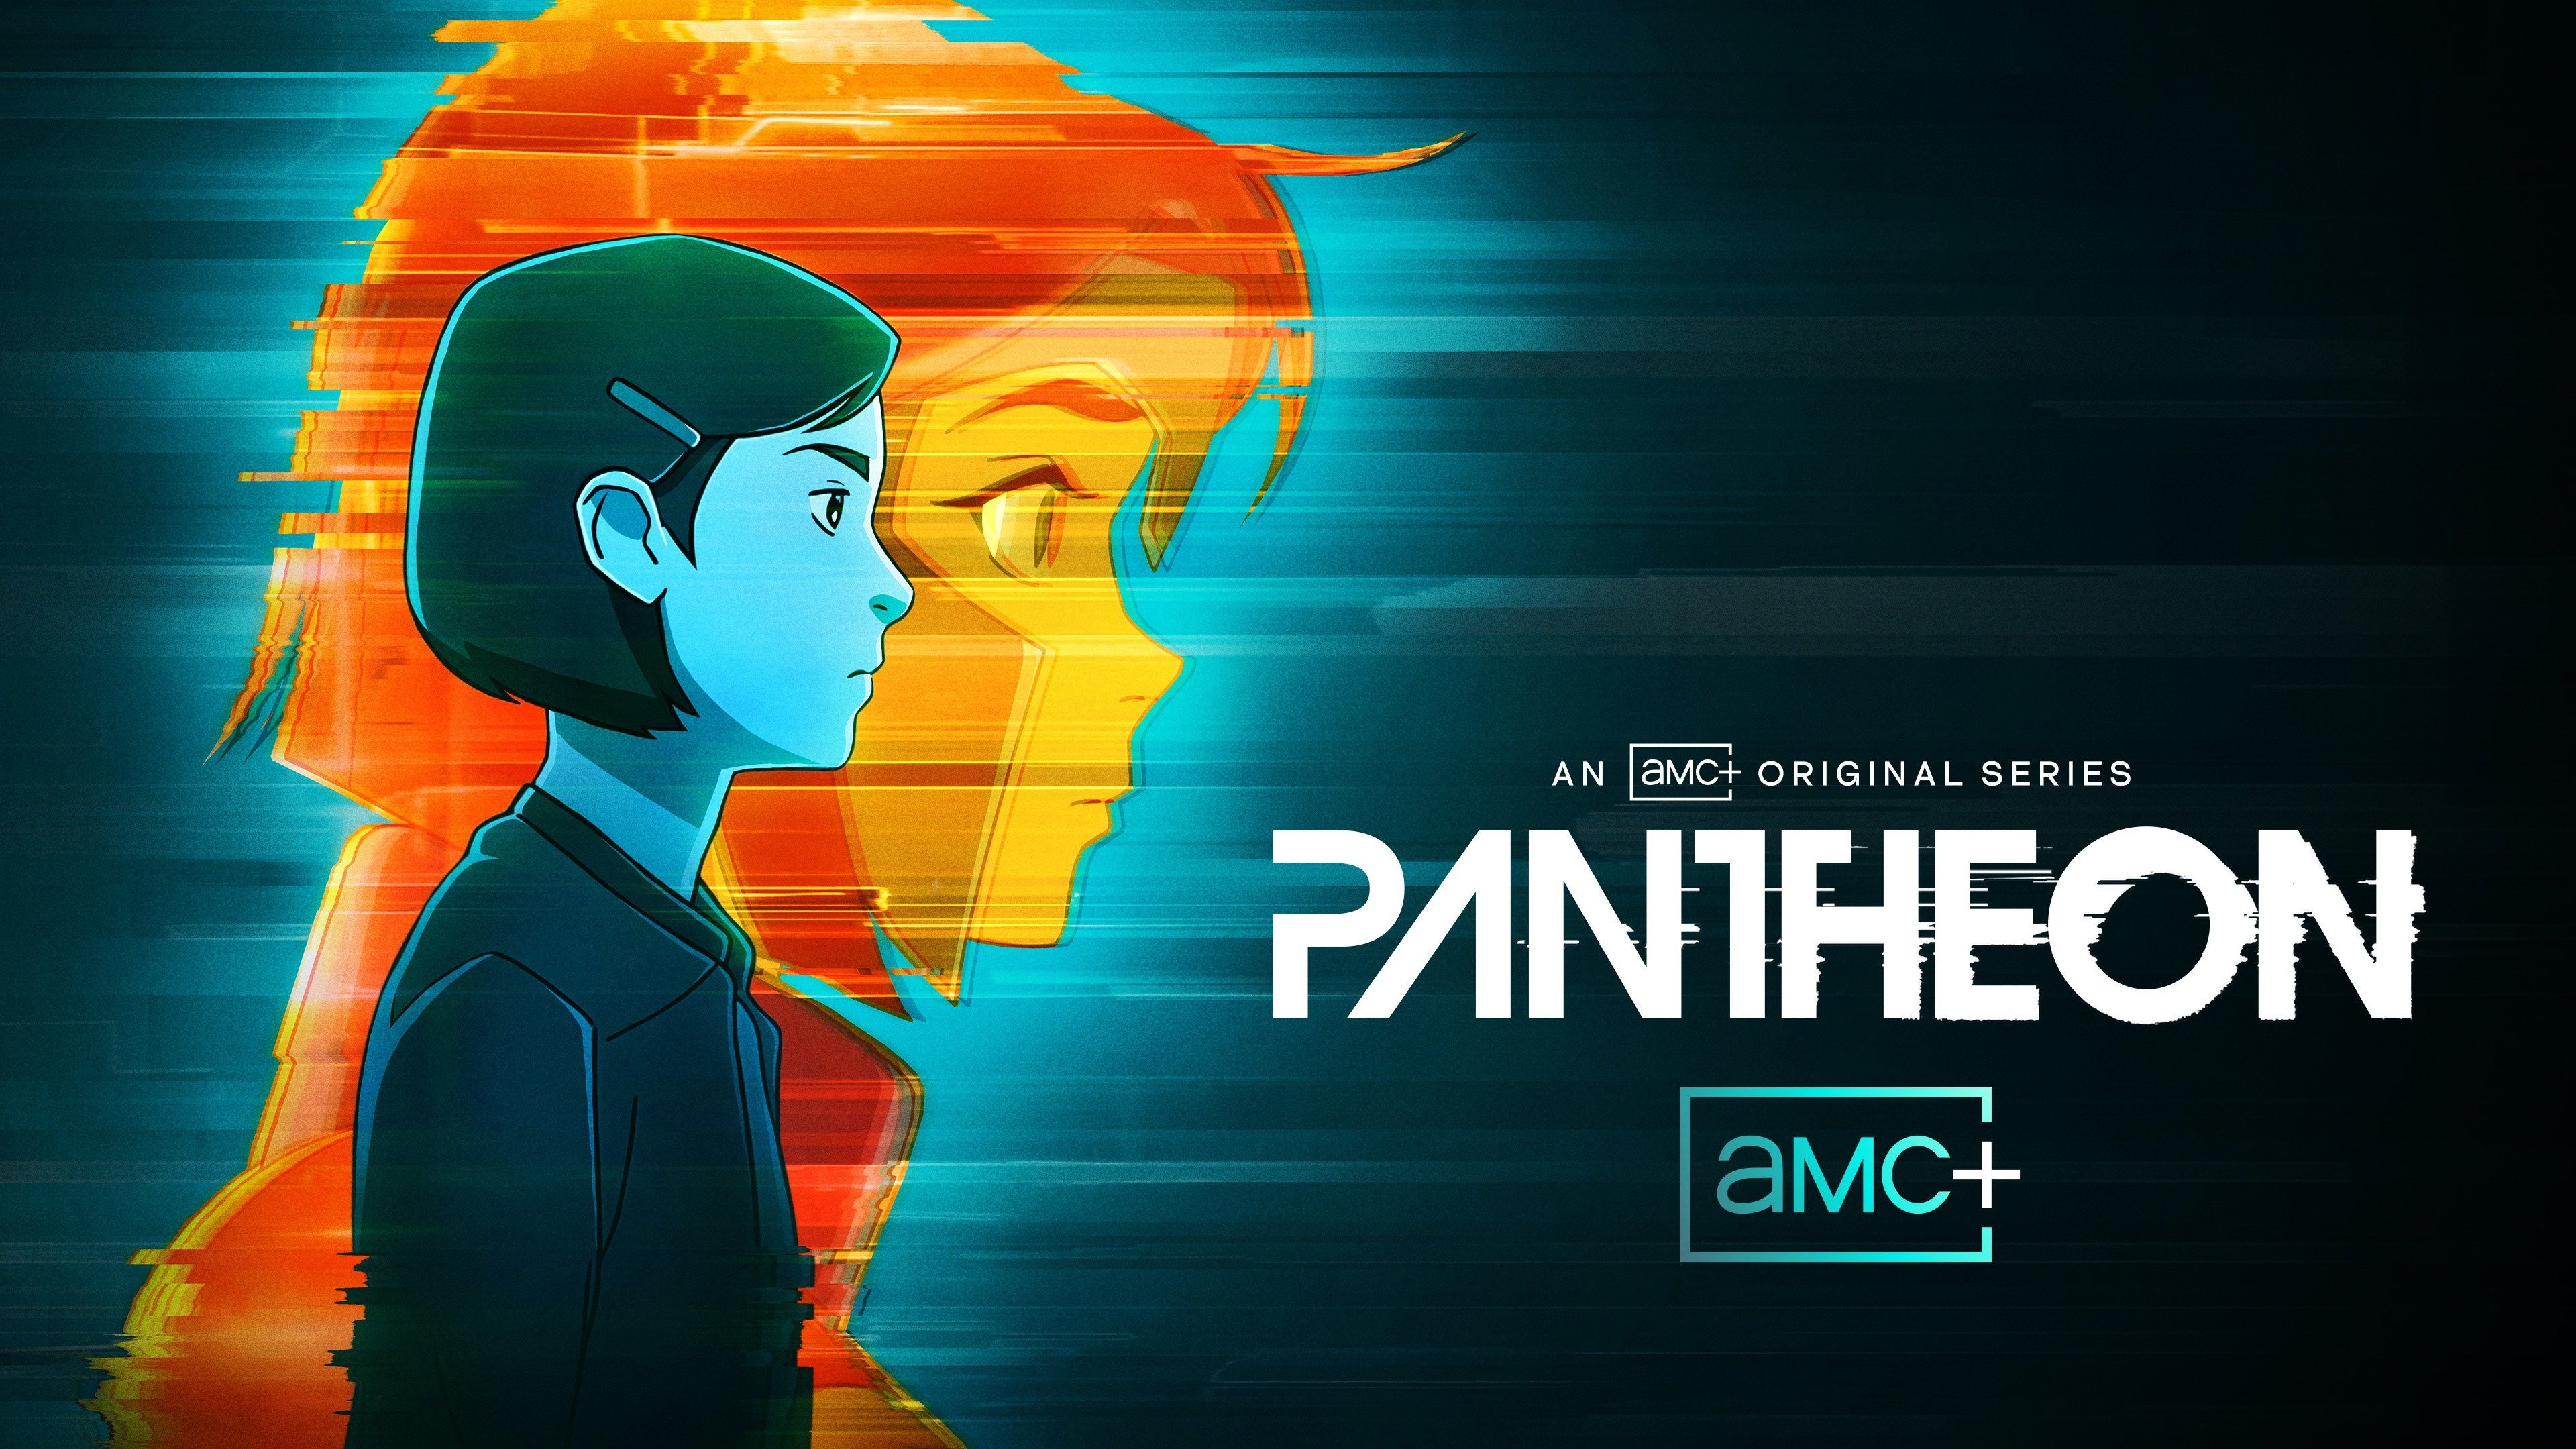 A genius sci-fi TV show almost no one has seen. #pantheon #animation #, pantheon